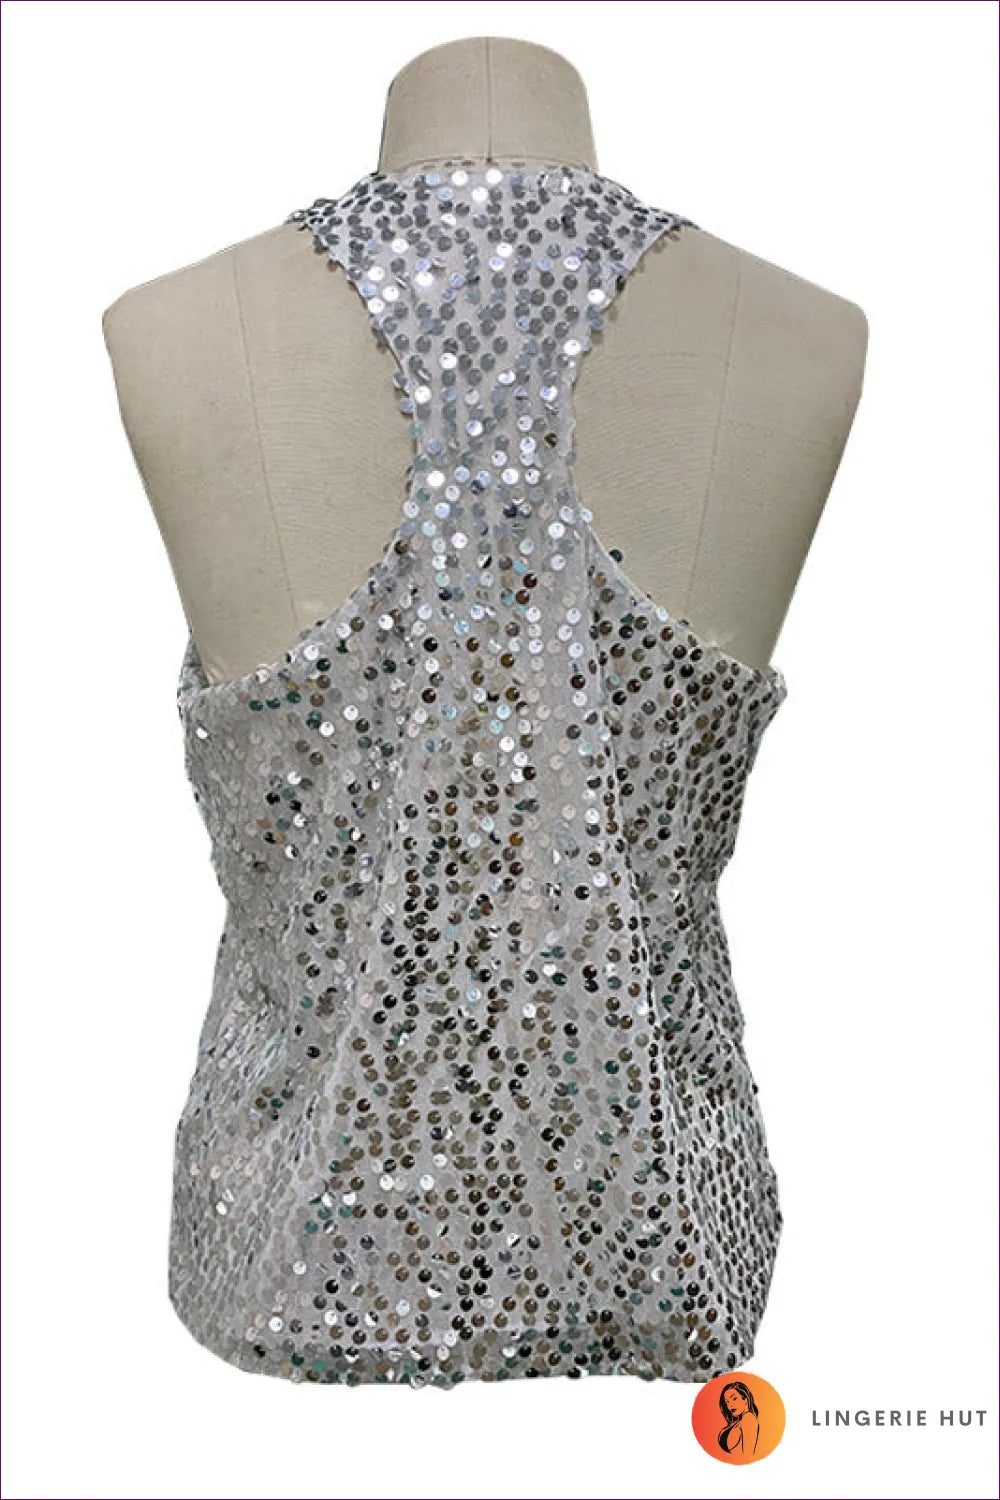 Dazzle In Style With Our Flirty Sequin Sleeveless Top. Crafted From Premium Polyester, It Features